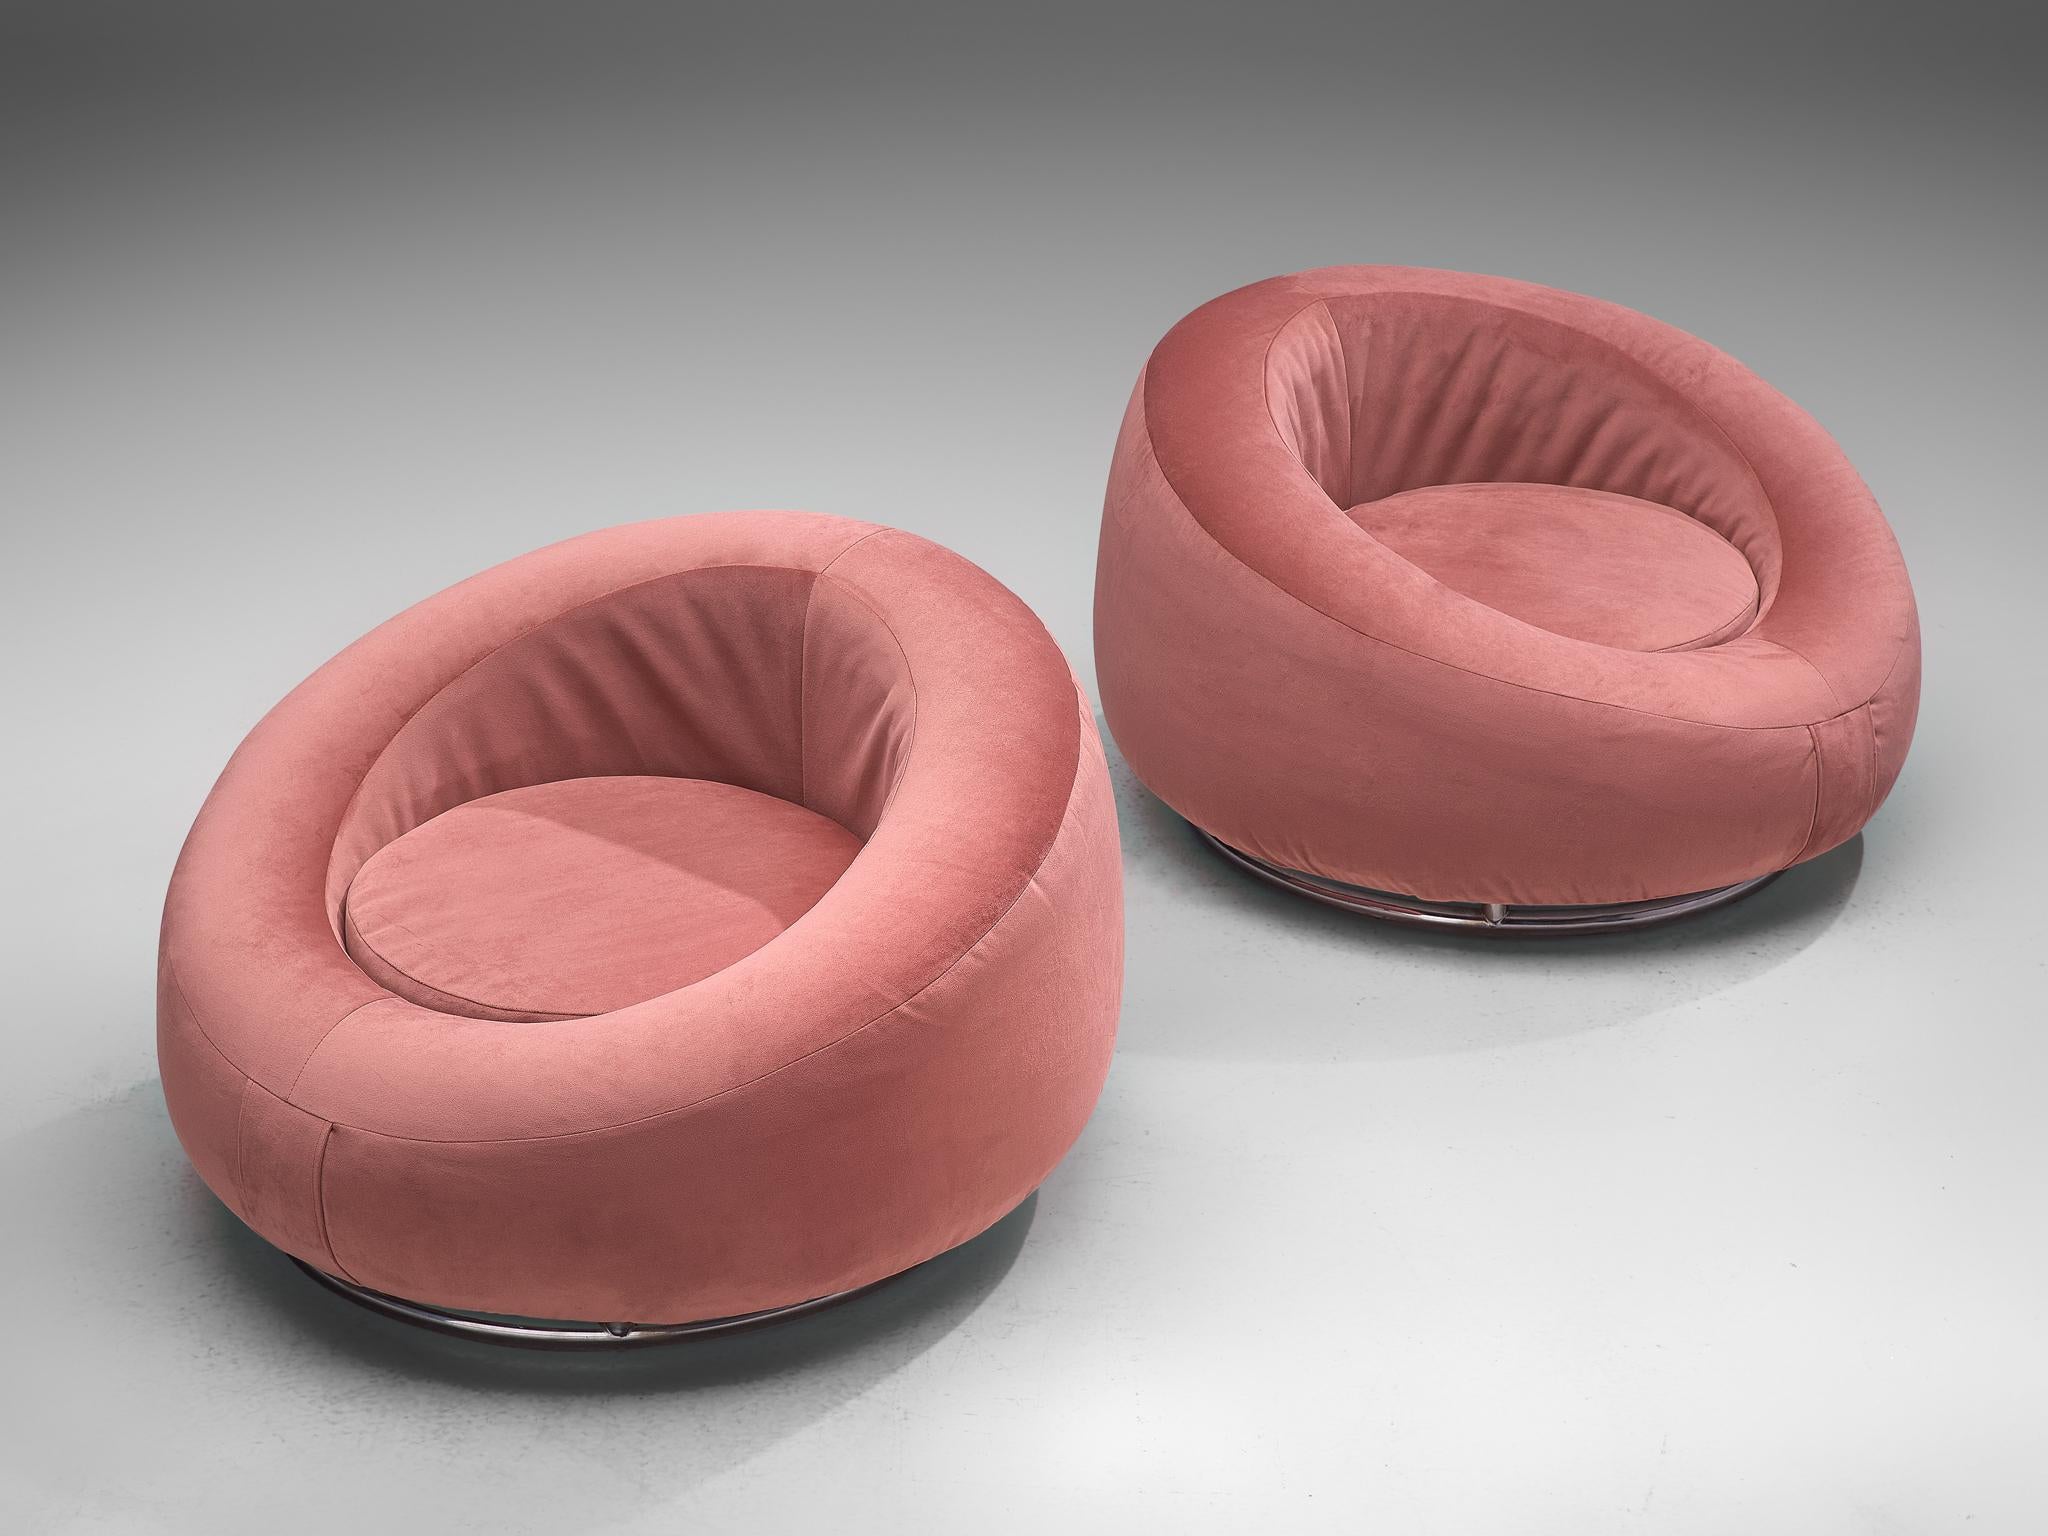 Pair of club chairs, pink velvet and chromed metal, Italy, 1970s.

This set of lounge chairs is a must if you are looking for some Hollywood Regency pieces for your interior. The low seat features a circular shape with a thick shell around that